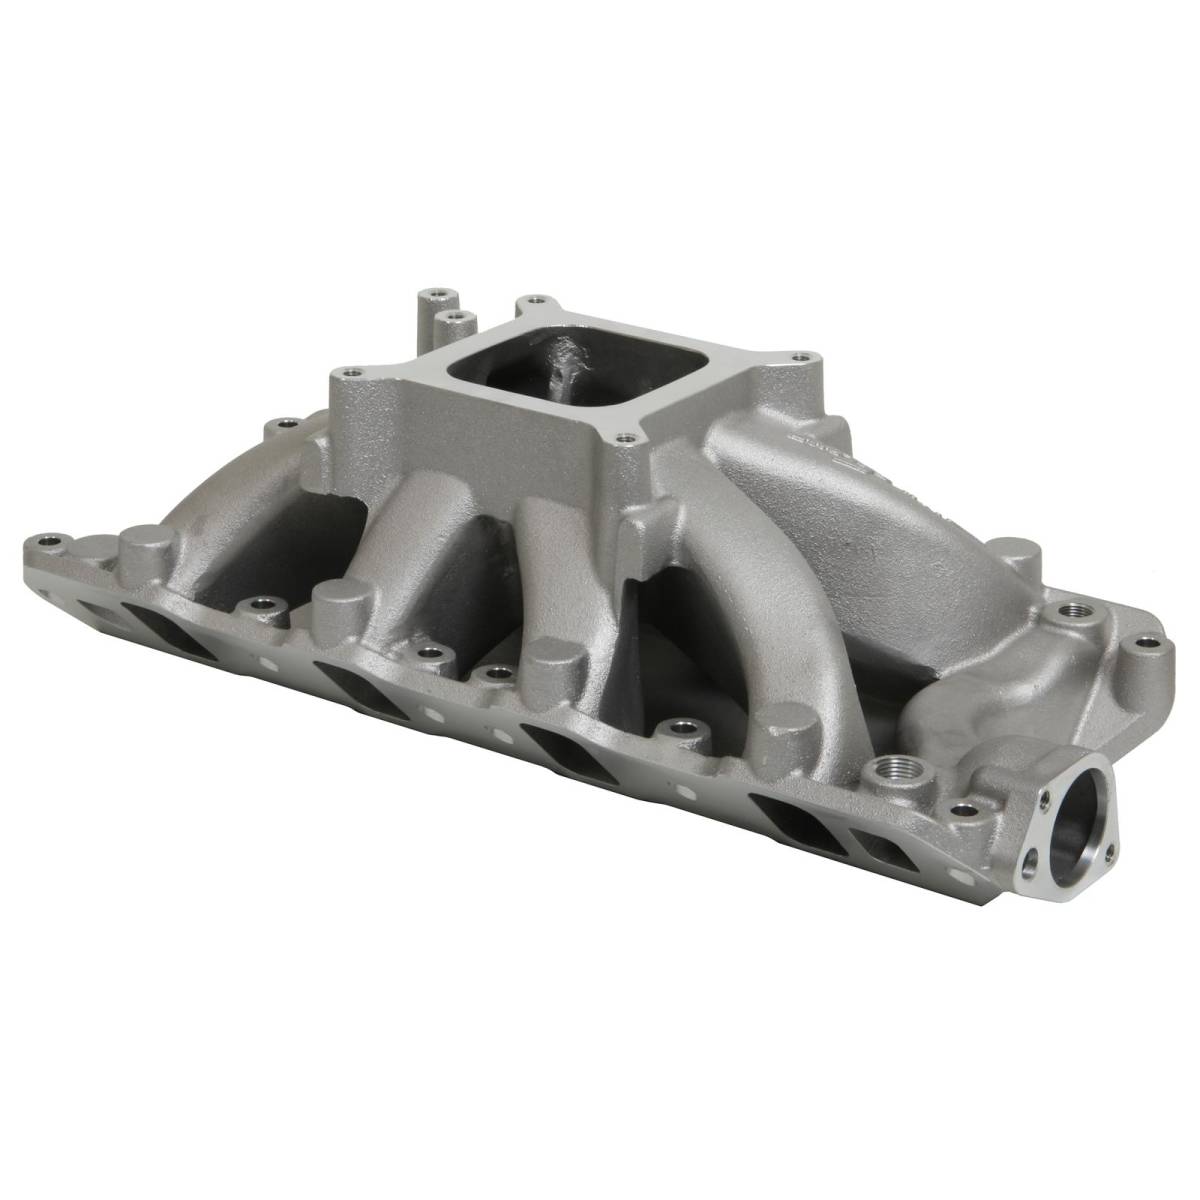 Trickflow - Trick Flow R-Series Intake Manifold for SBF 302 w/ Holley 4150 Style Pattern - Image 1